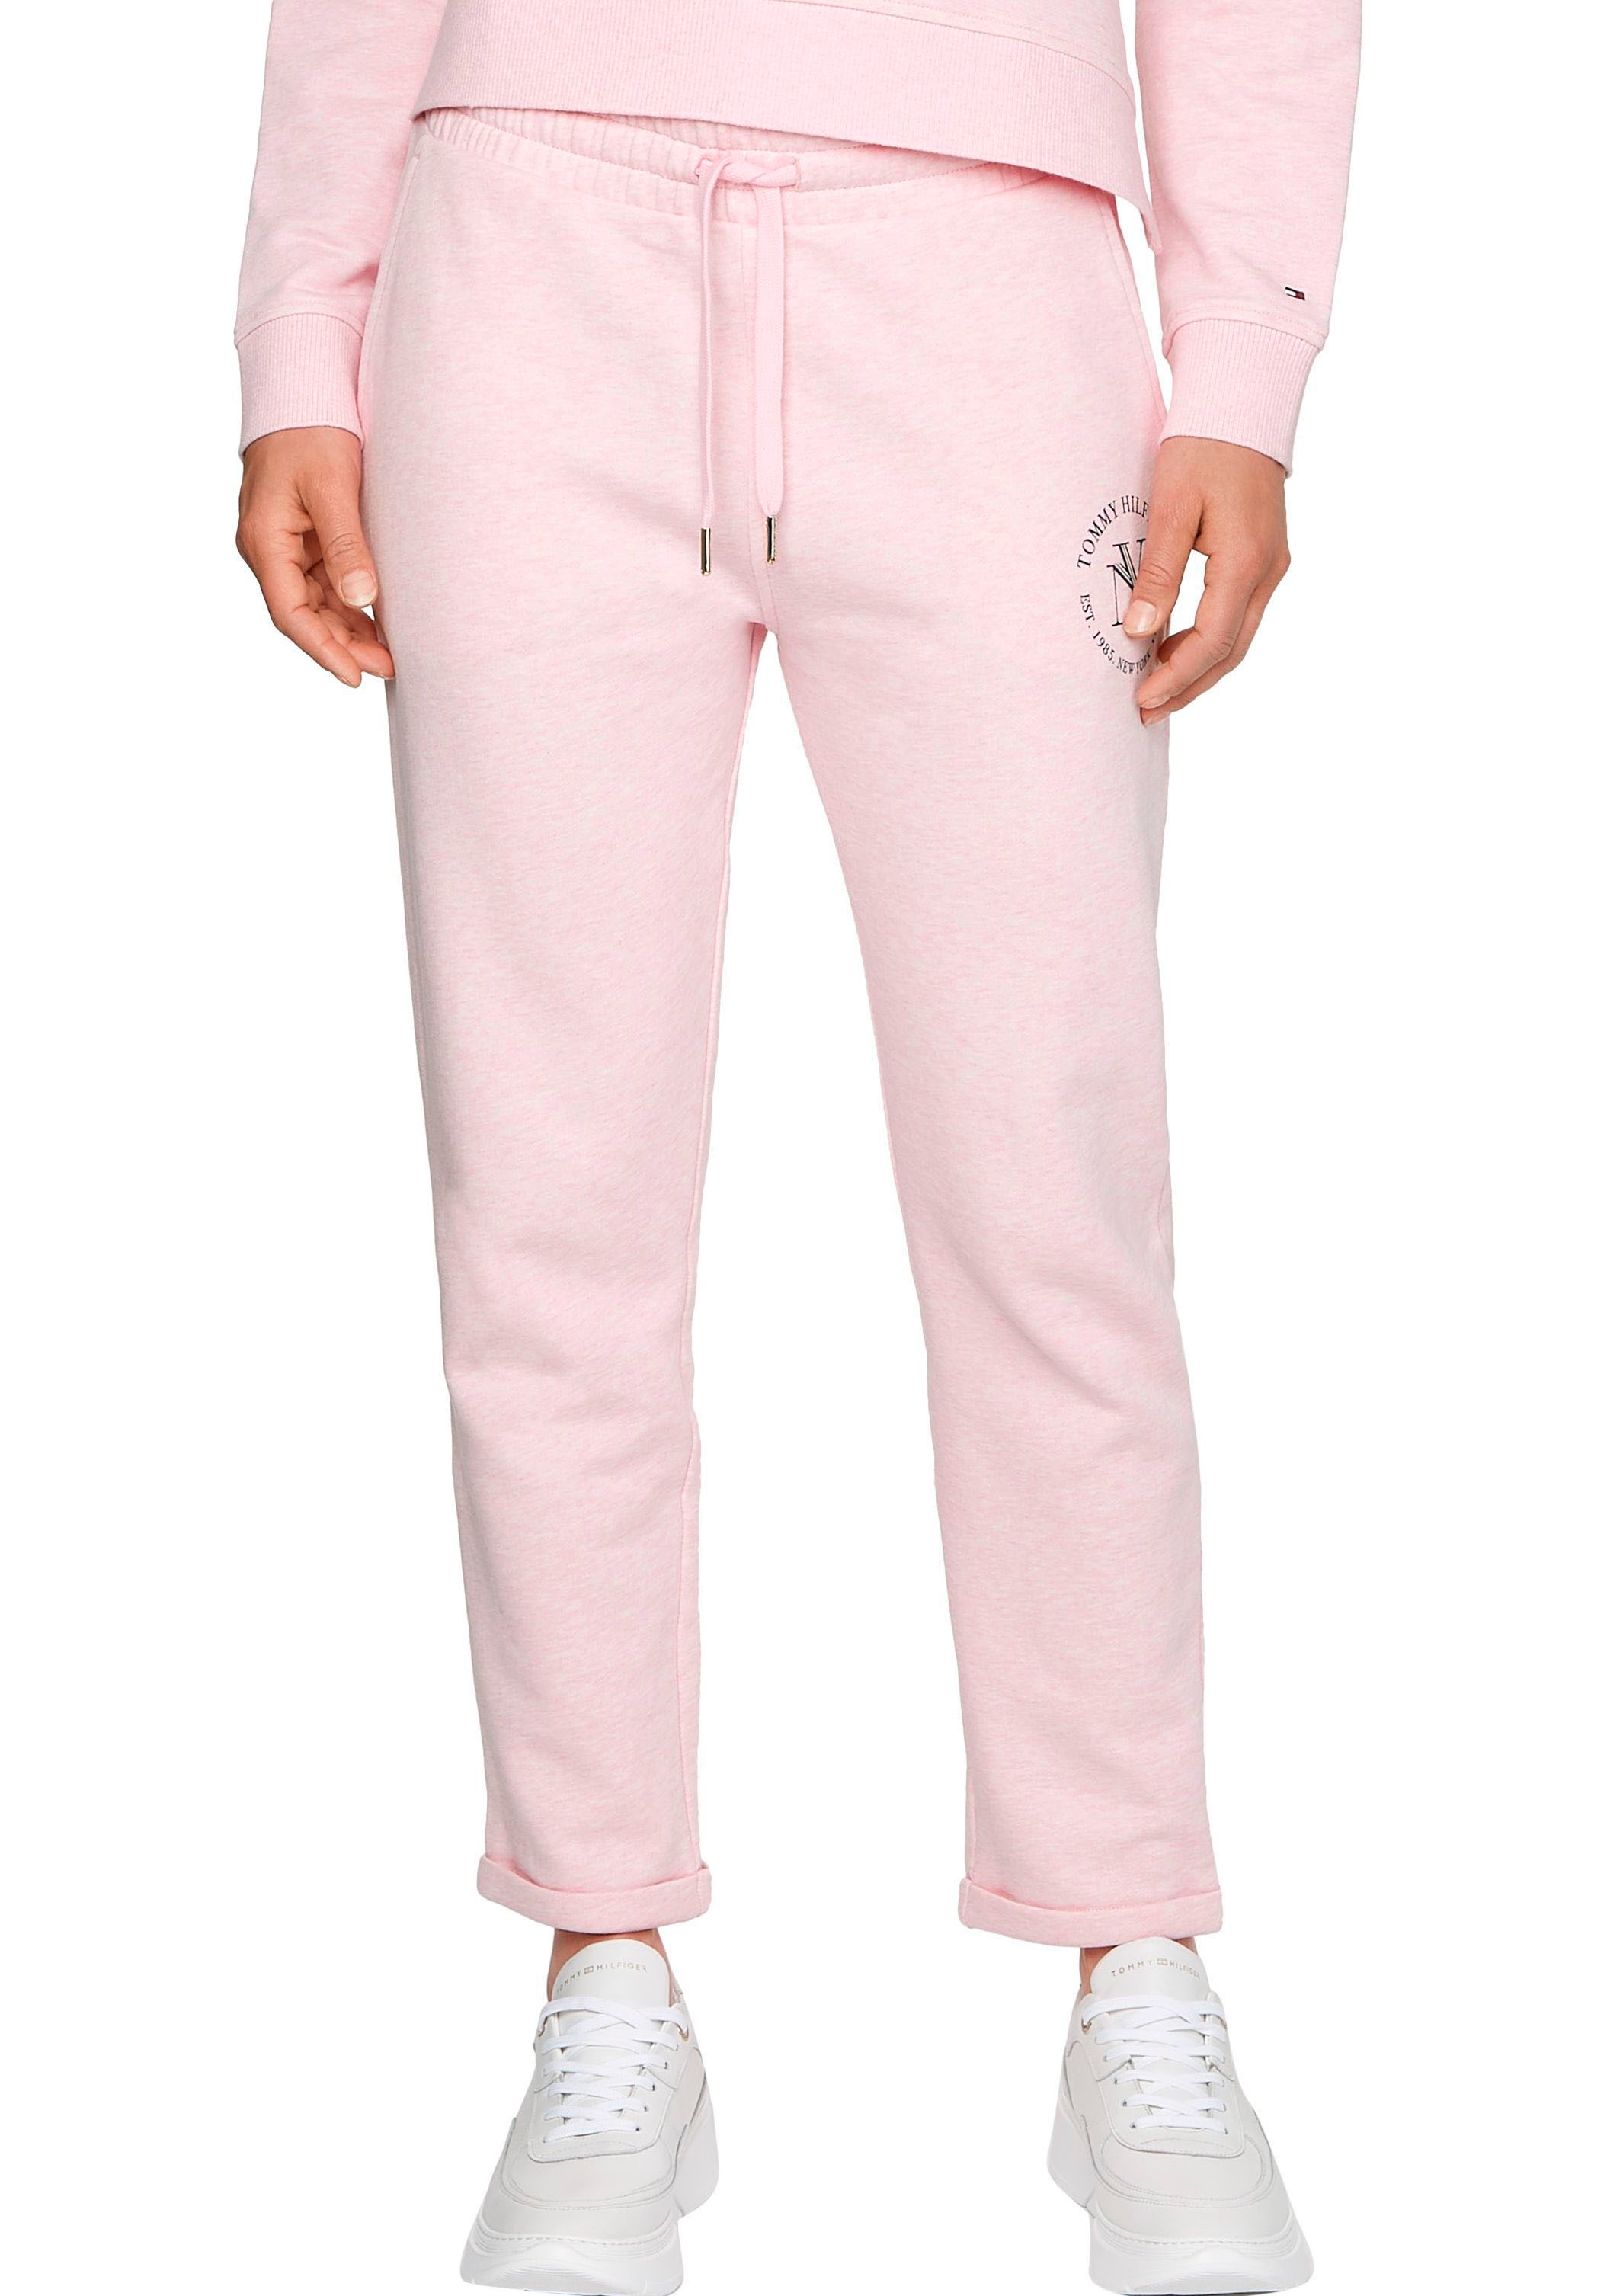 tommy hilfiger -  Sweatpants "TAPERED NYC ROUNDALL SWEATPANTS", mit  Markenlabel